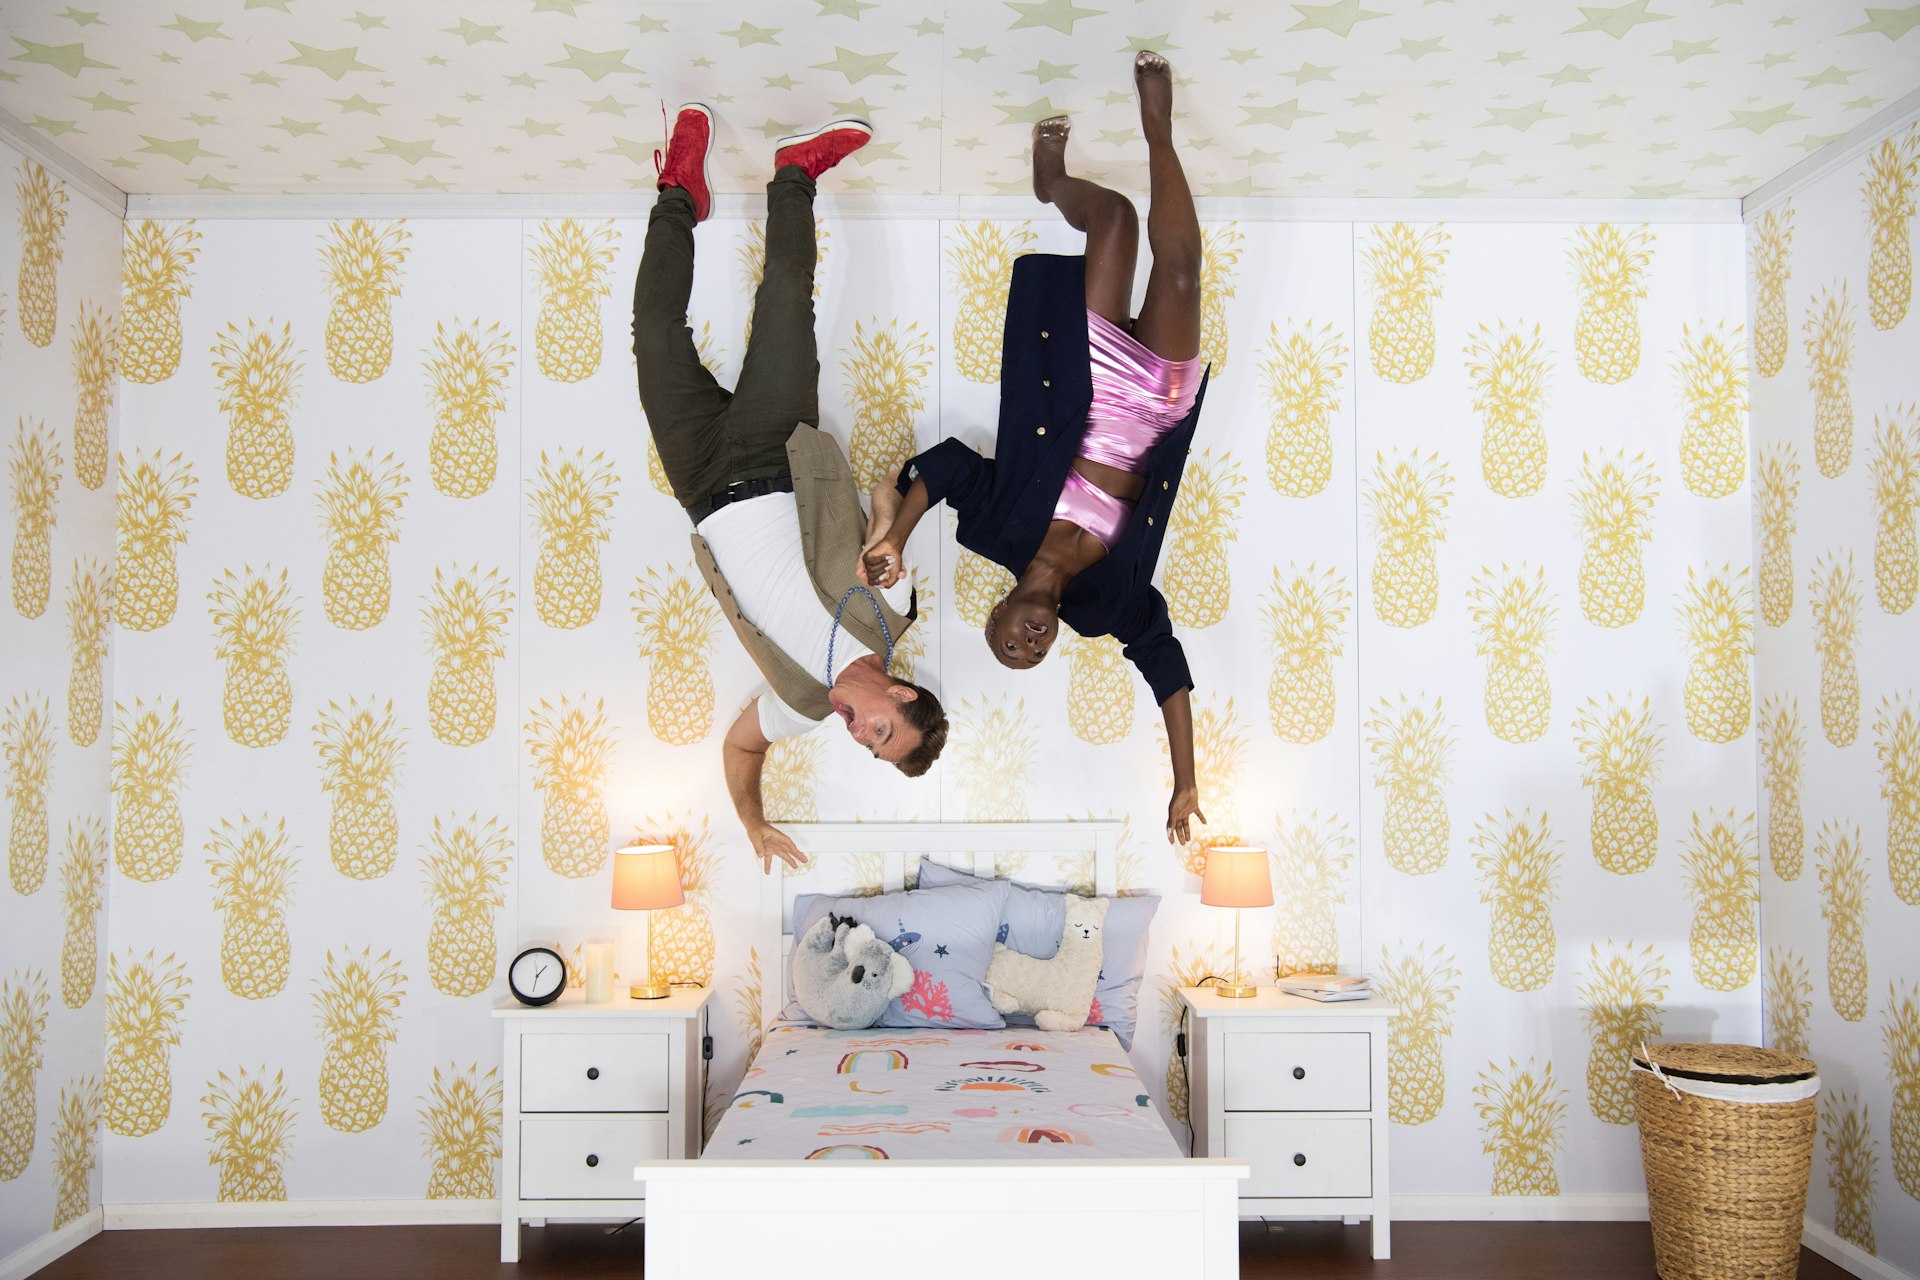 Visitors play in an 'upside-down bedroom' at an exhibit in Sydney